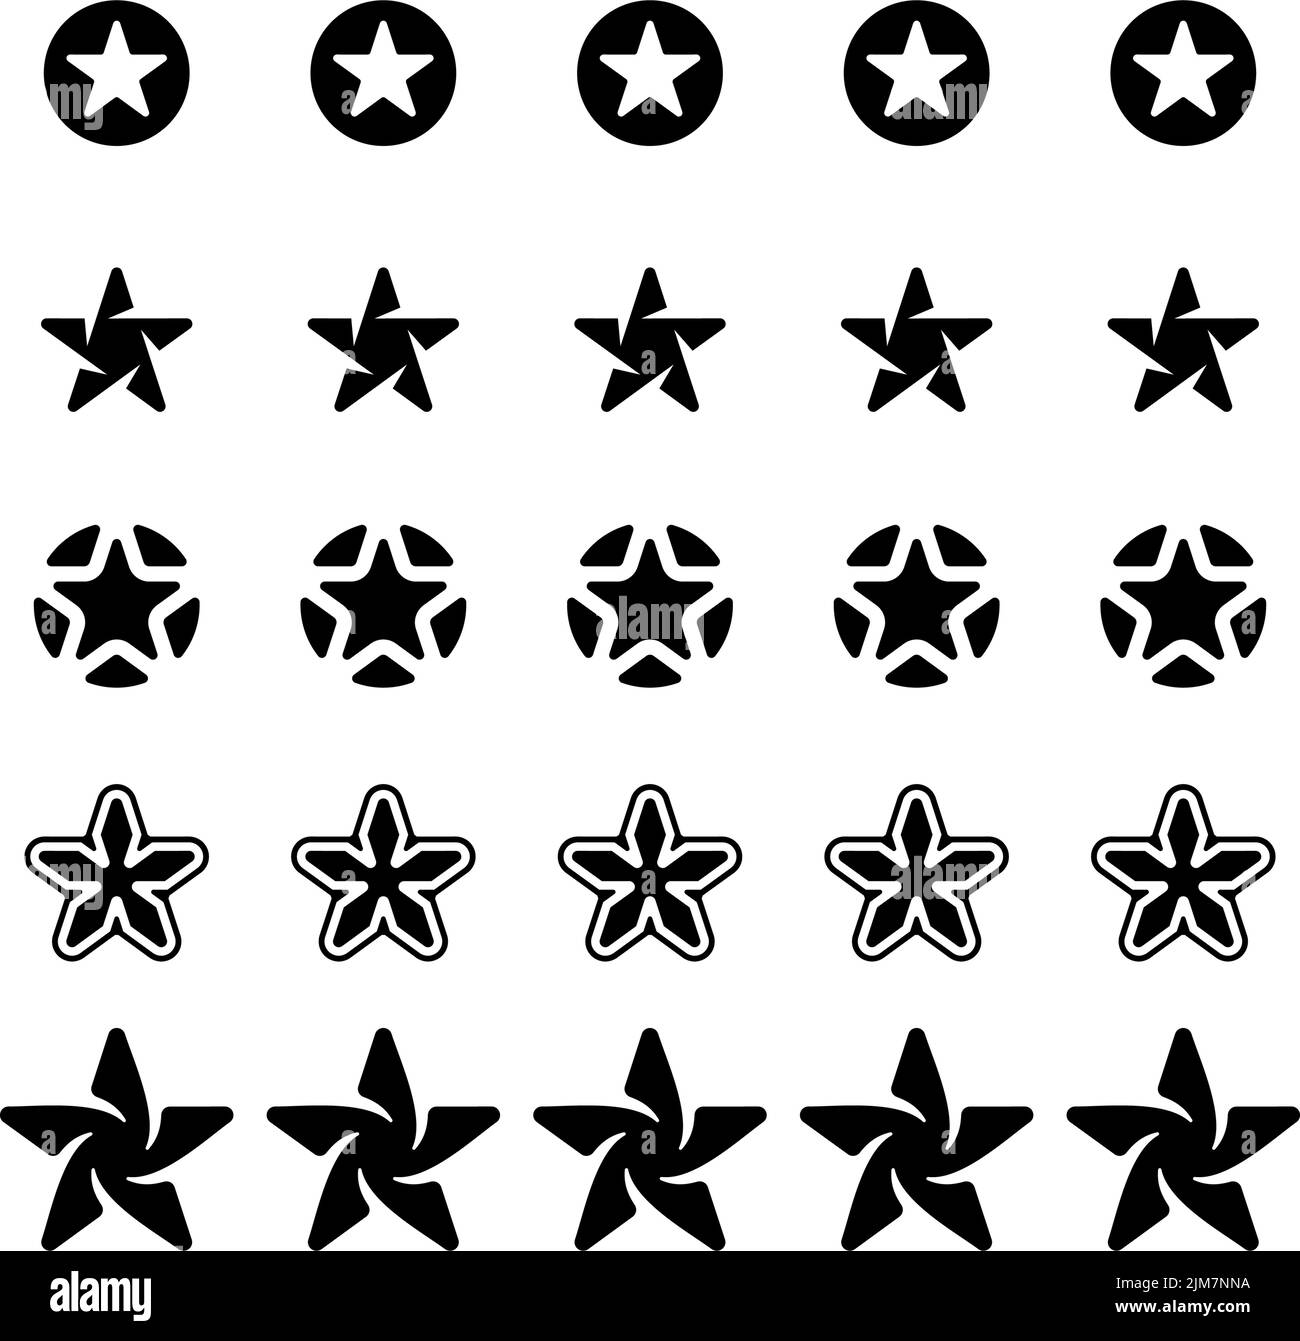 The star signs in different styles with white background Stock Vector